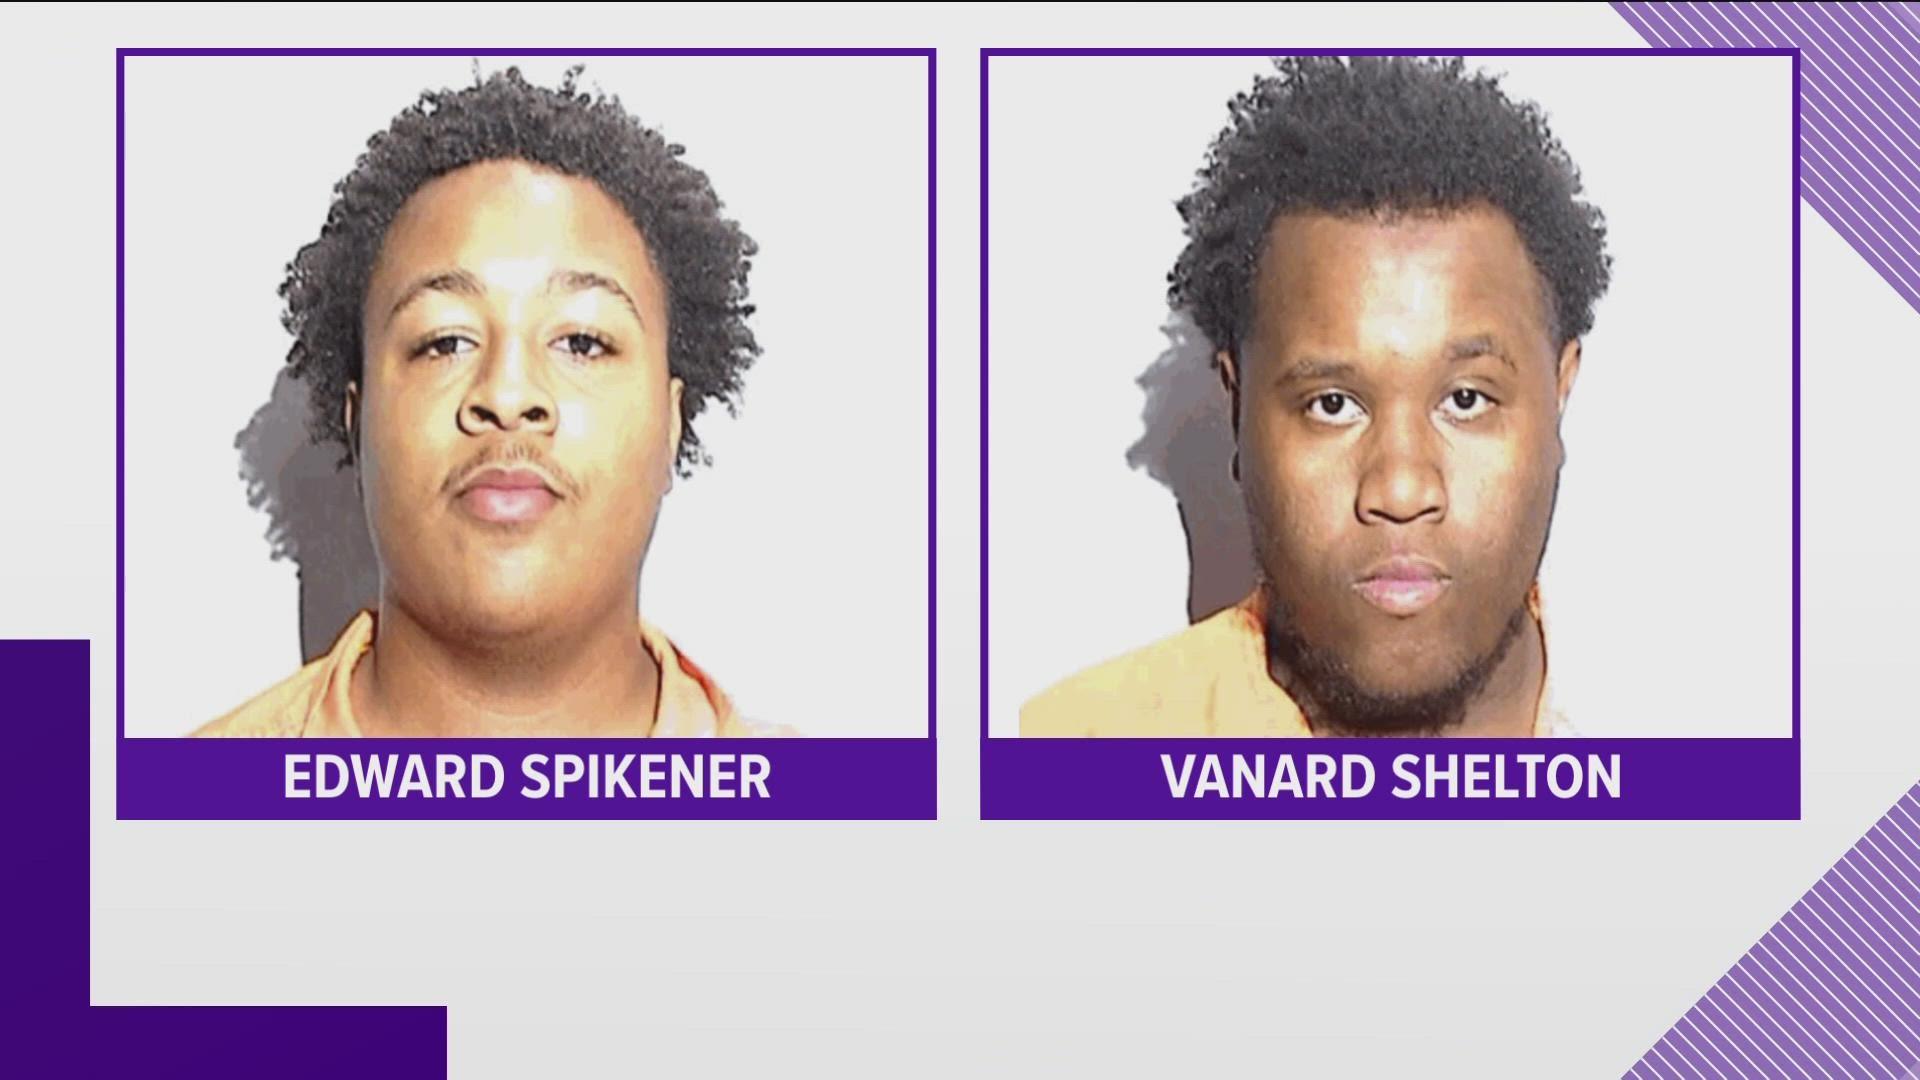 According to police, 18-year-old Vanard Shelton and 19-year-old Edward Spikener brought a loaded AR-15 rifle and pistol to a Bowsher parking lot on Sept. 24, 2022.